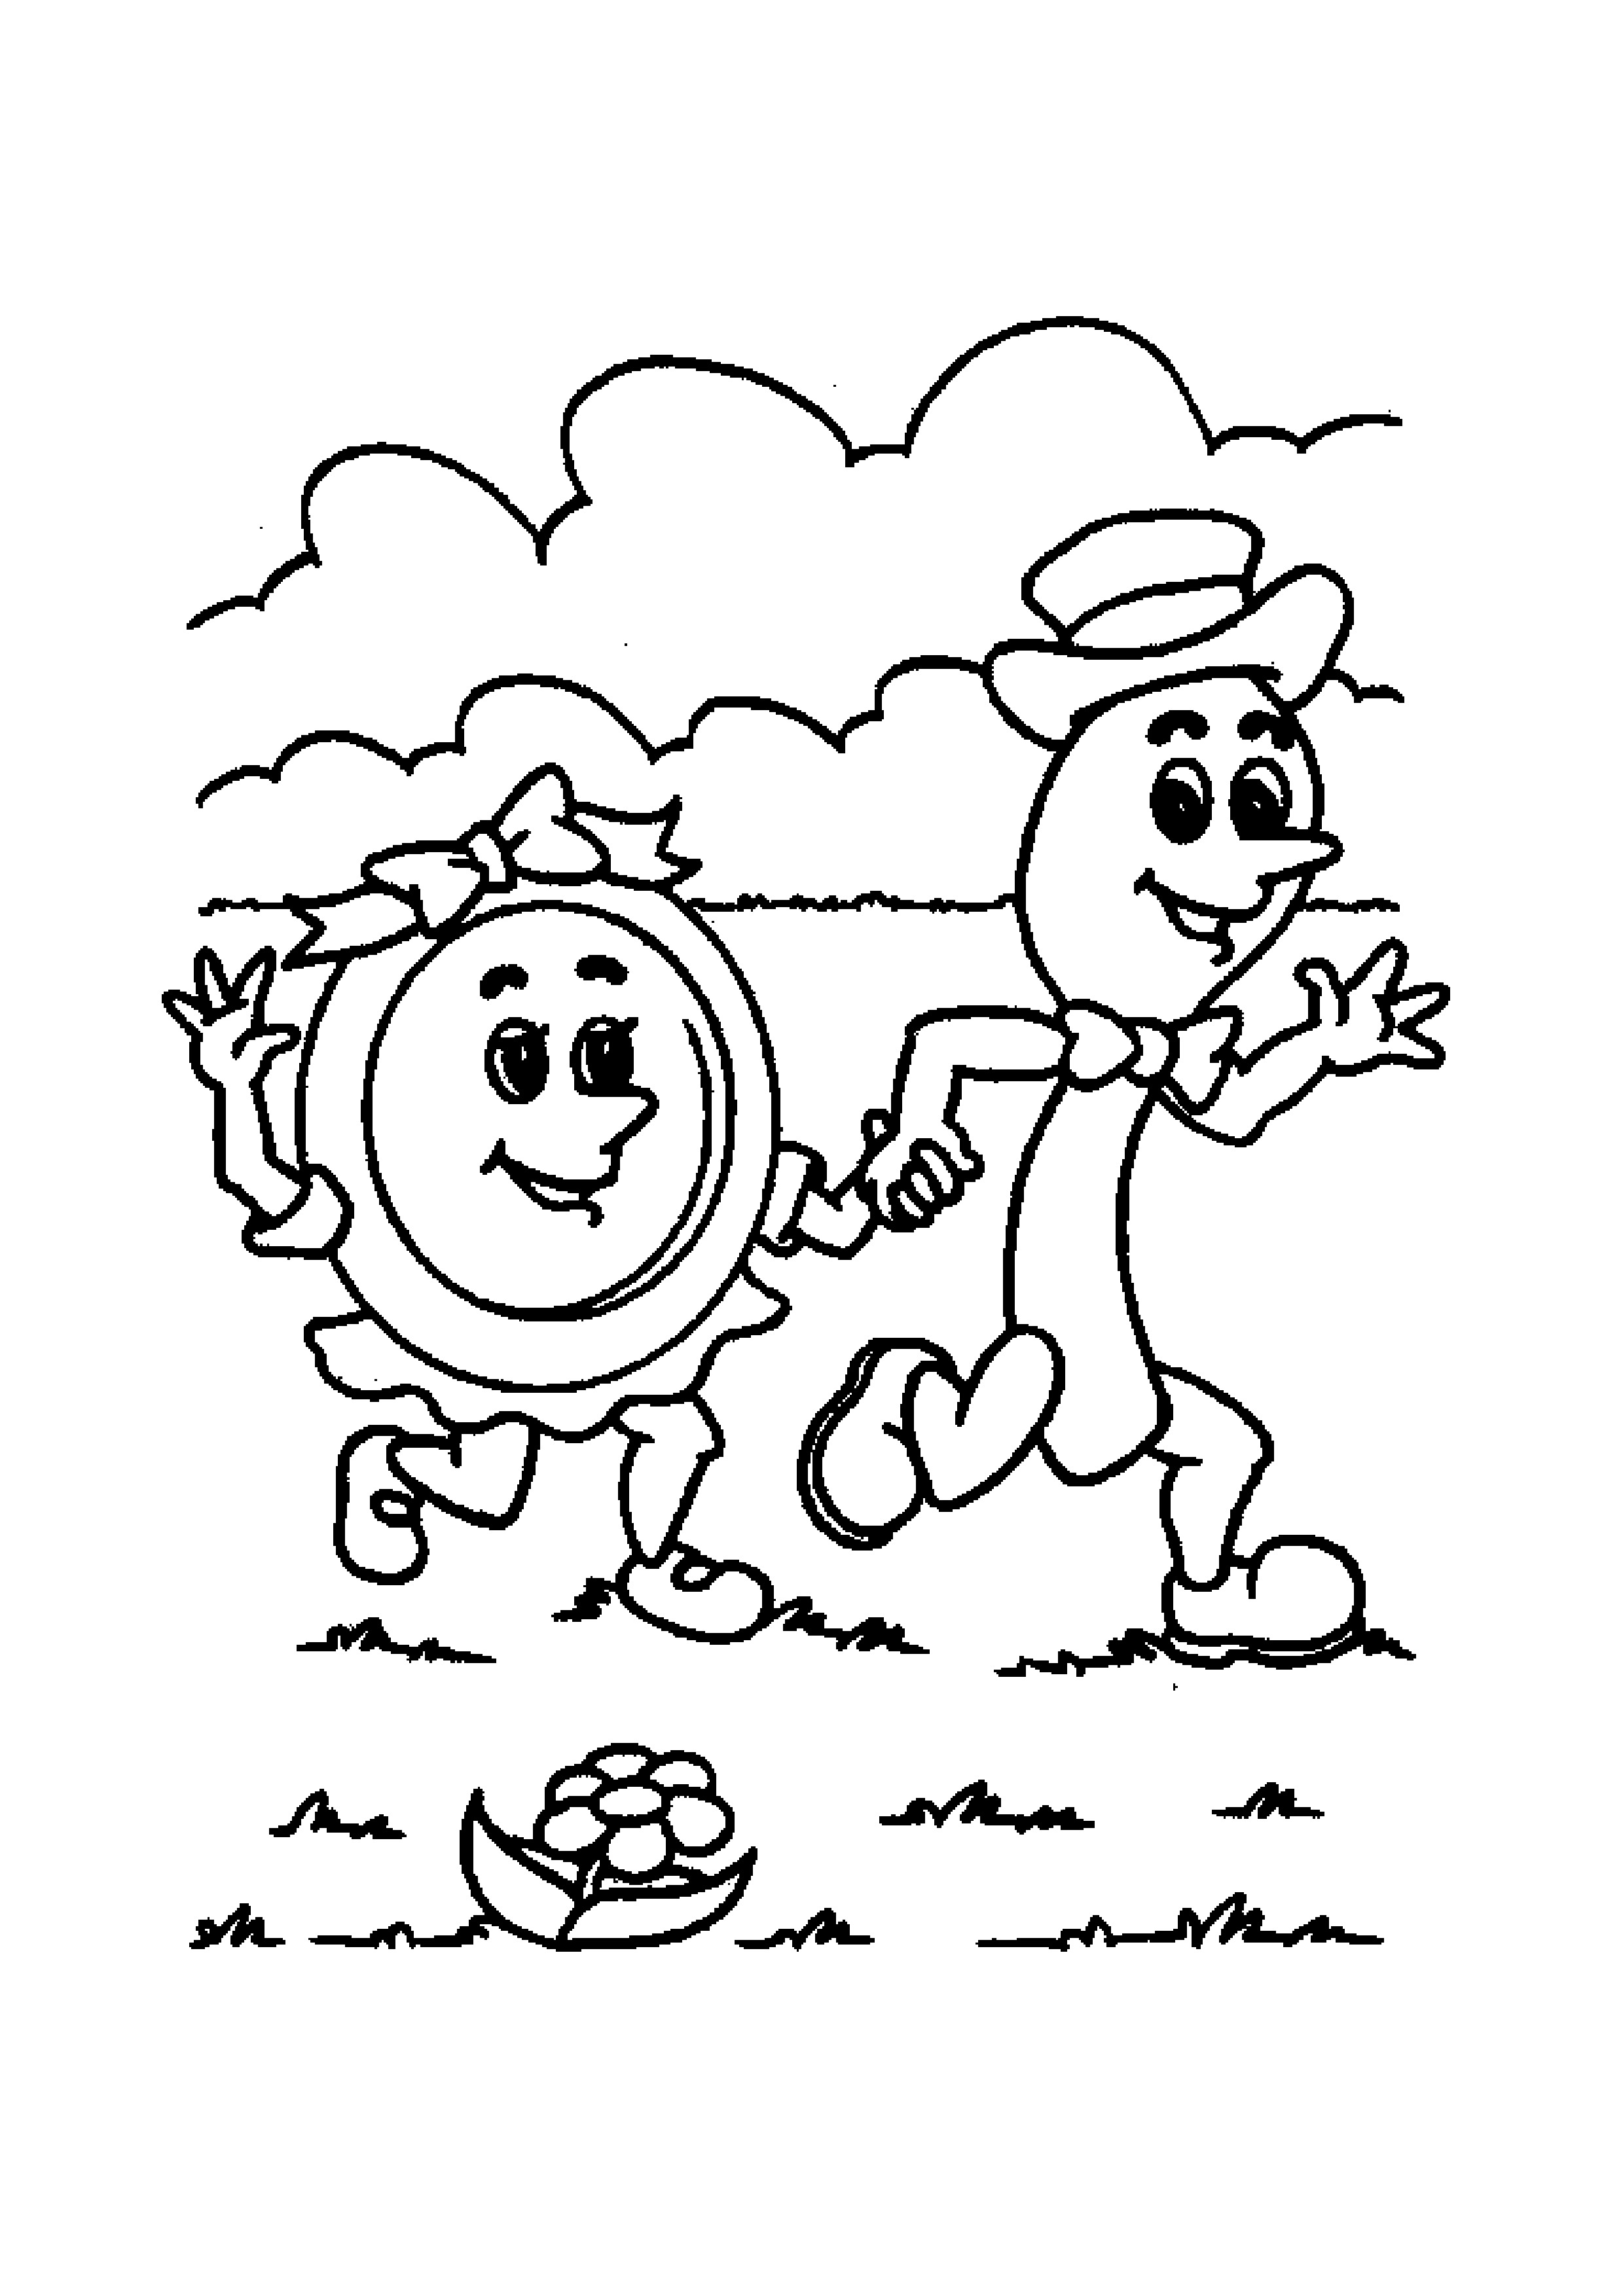 Nursery Rhyme Coloring Pages At Free Printable Colorings Pages To Print And Color